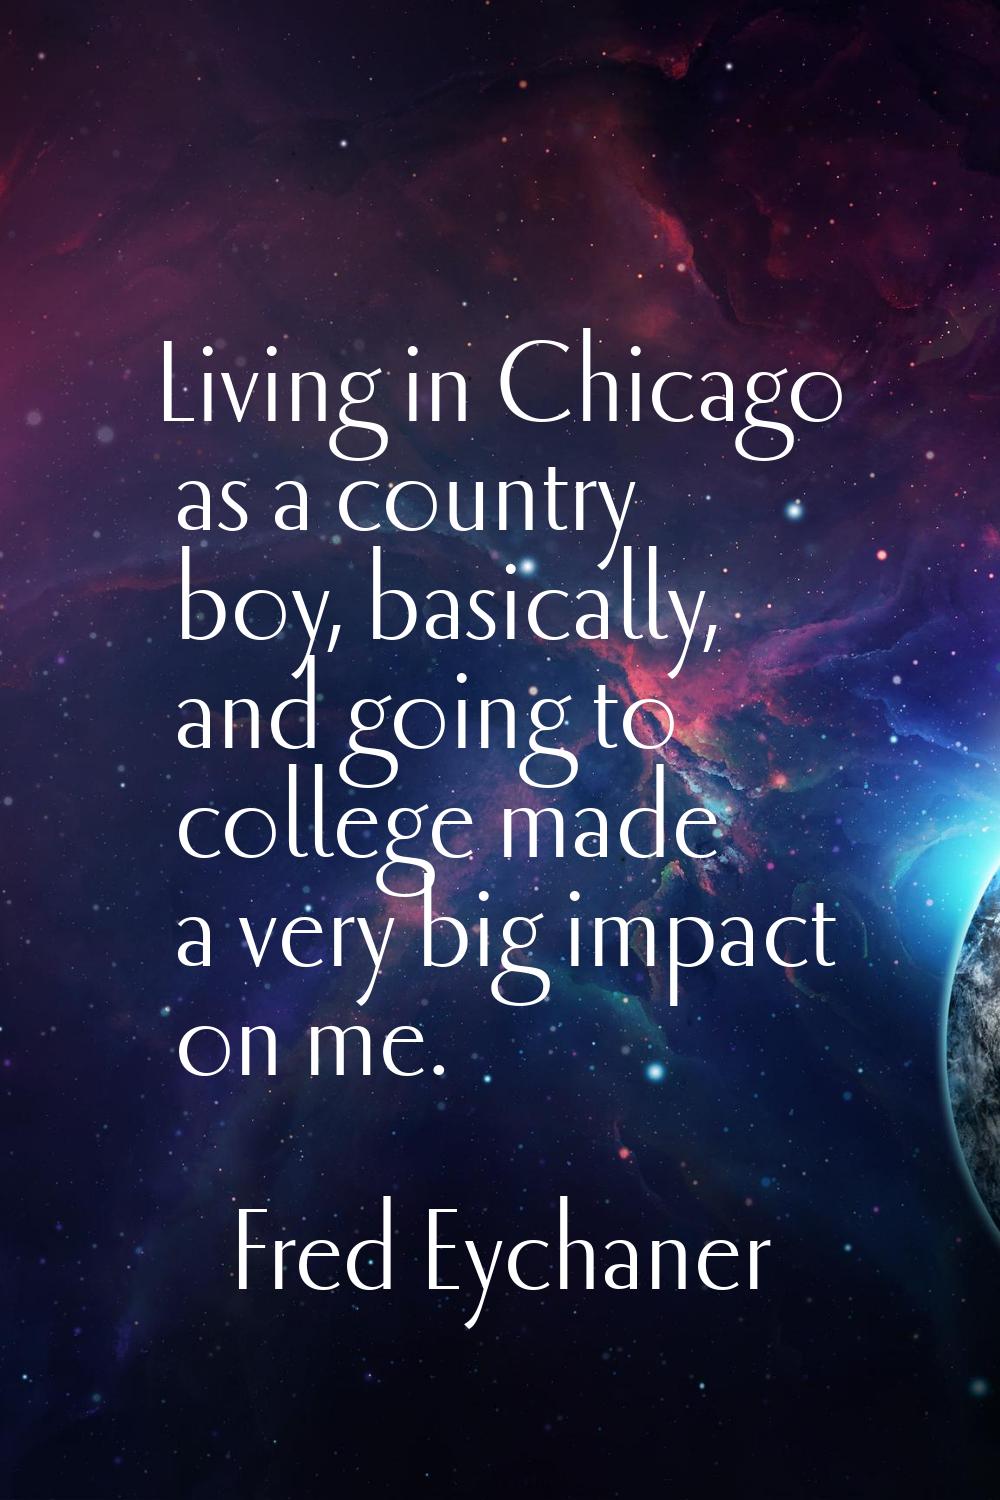 Living in Chicago as a country boy, basically, and going to college made a very big impact on me.